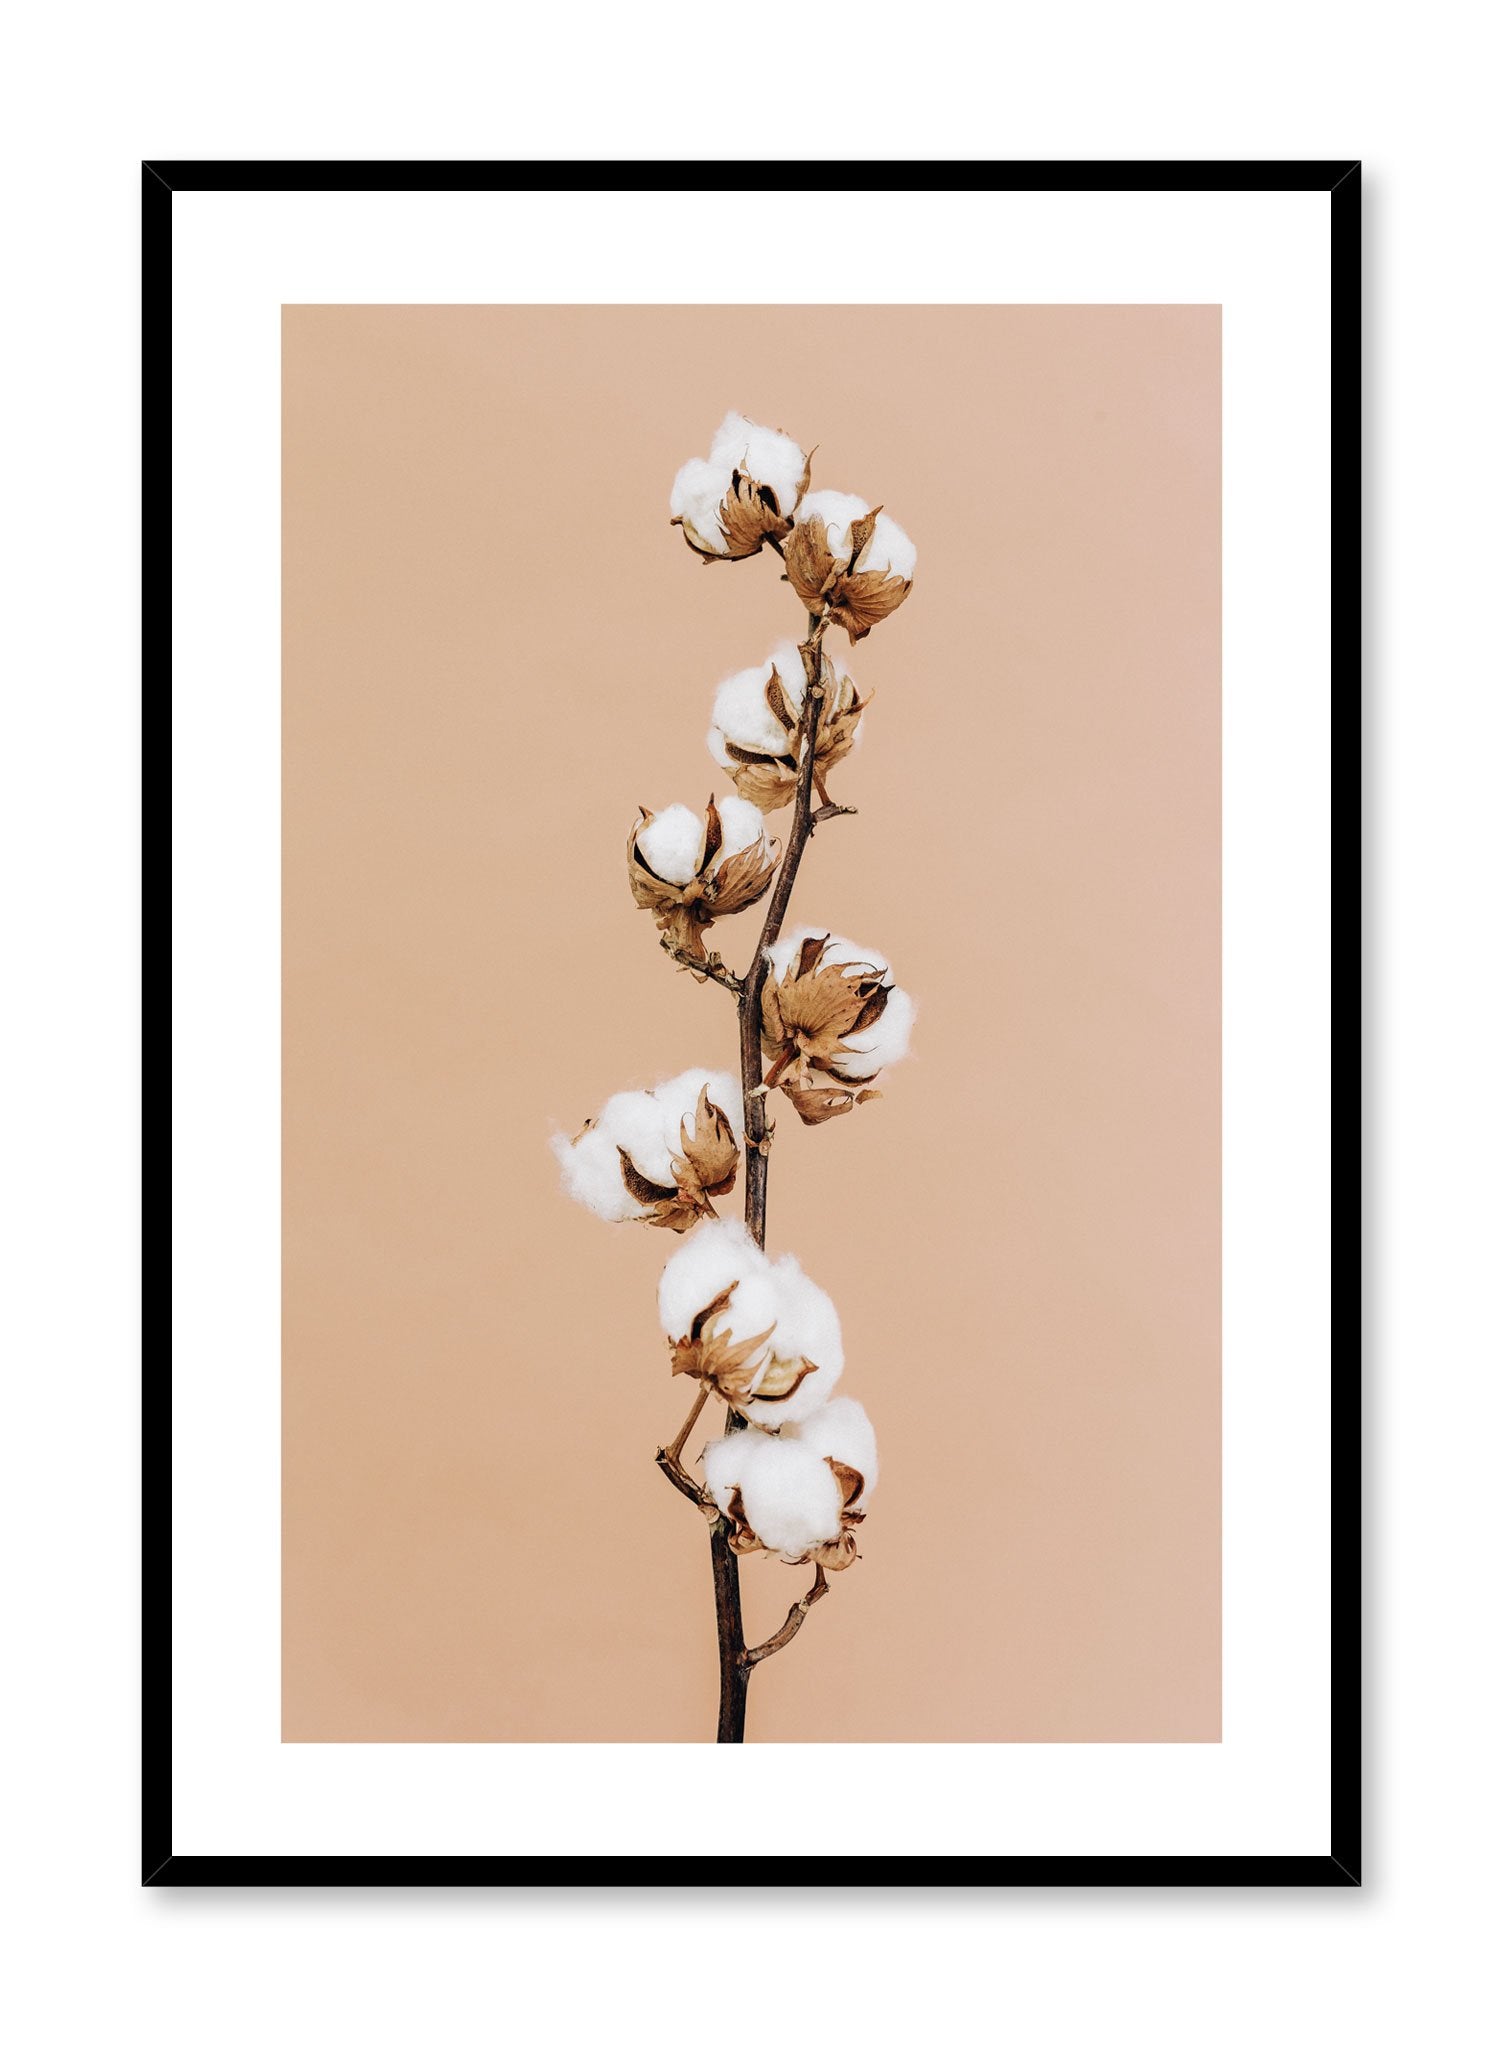 Minimalistic wall poster by Opposite Wall with cotton branch photography